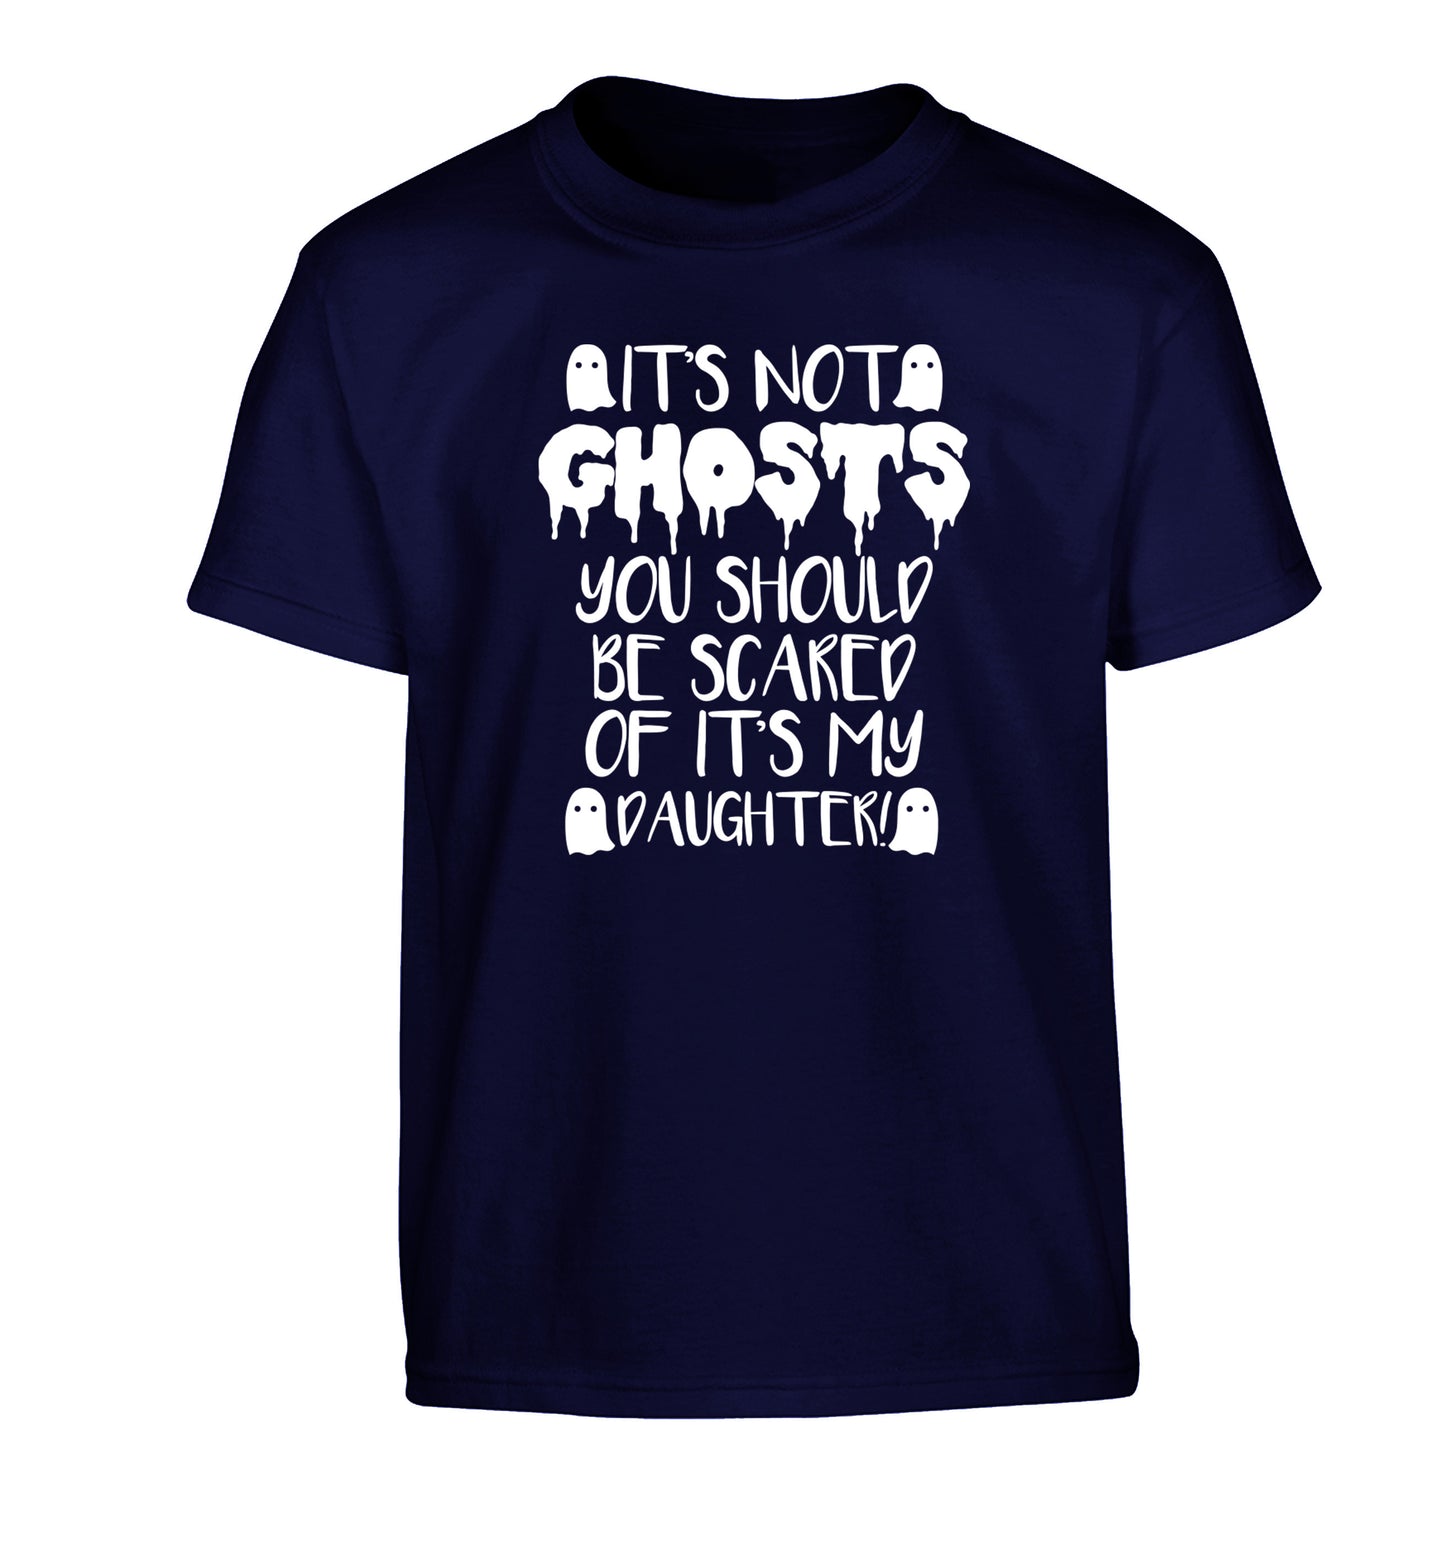 It's not ghosts you should be scared of it's my daughter! Children's navy Tshirt 12-14 Years